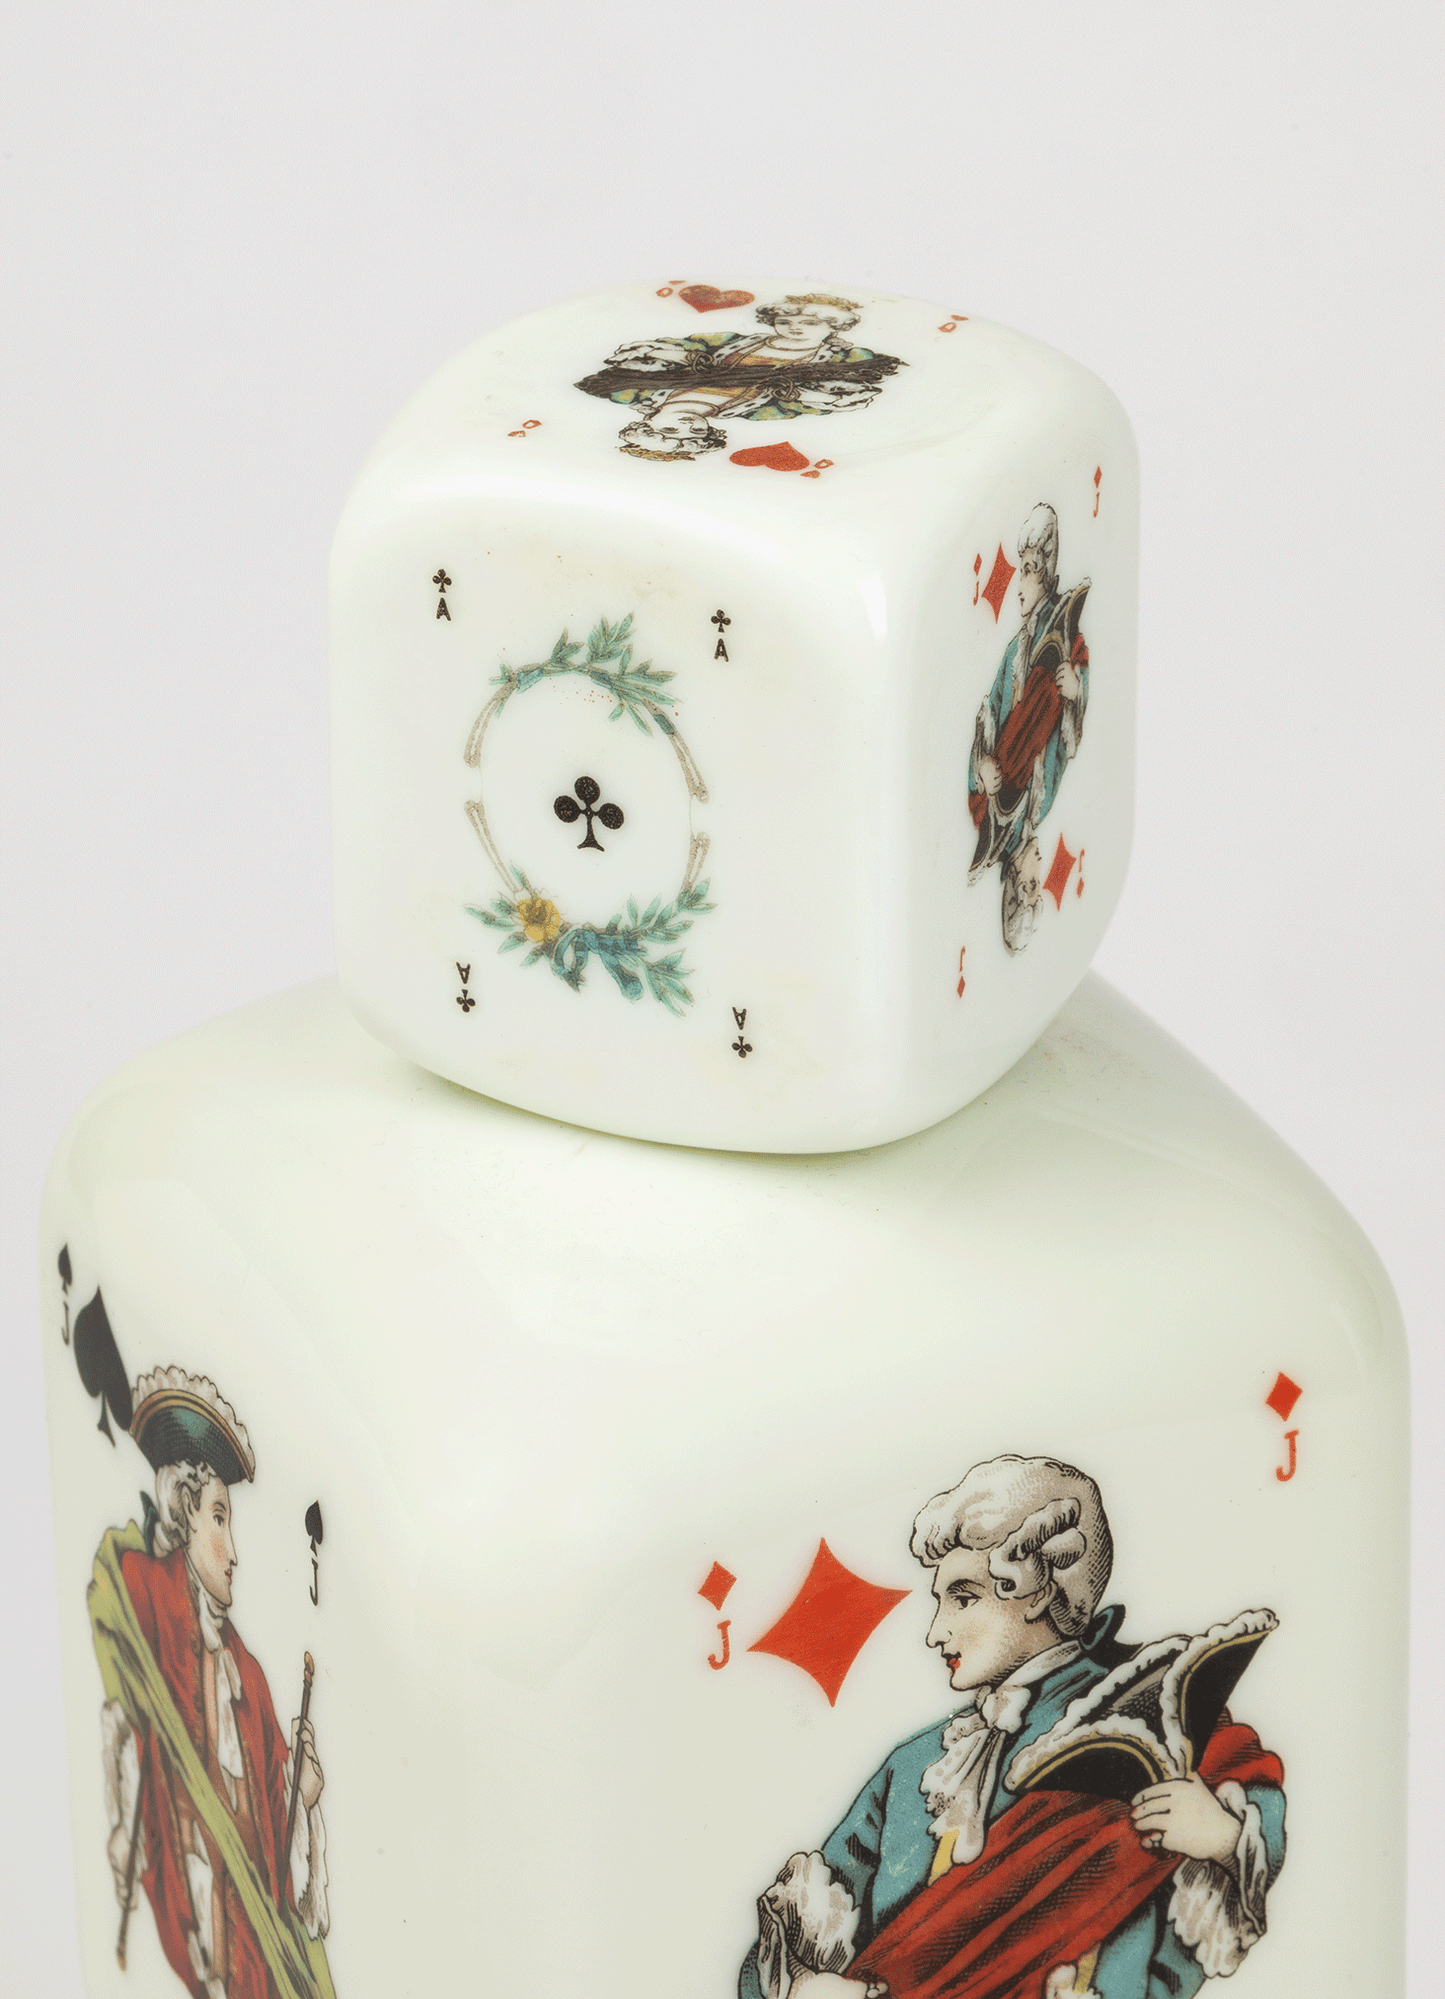 Italian 1950s Milk Glass Decanter with Playing Card Design